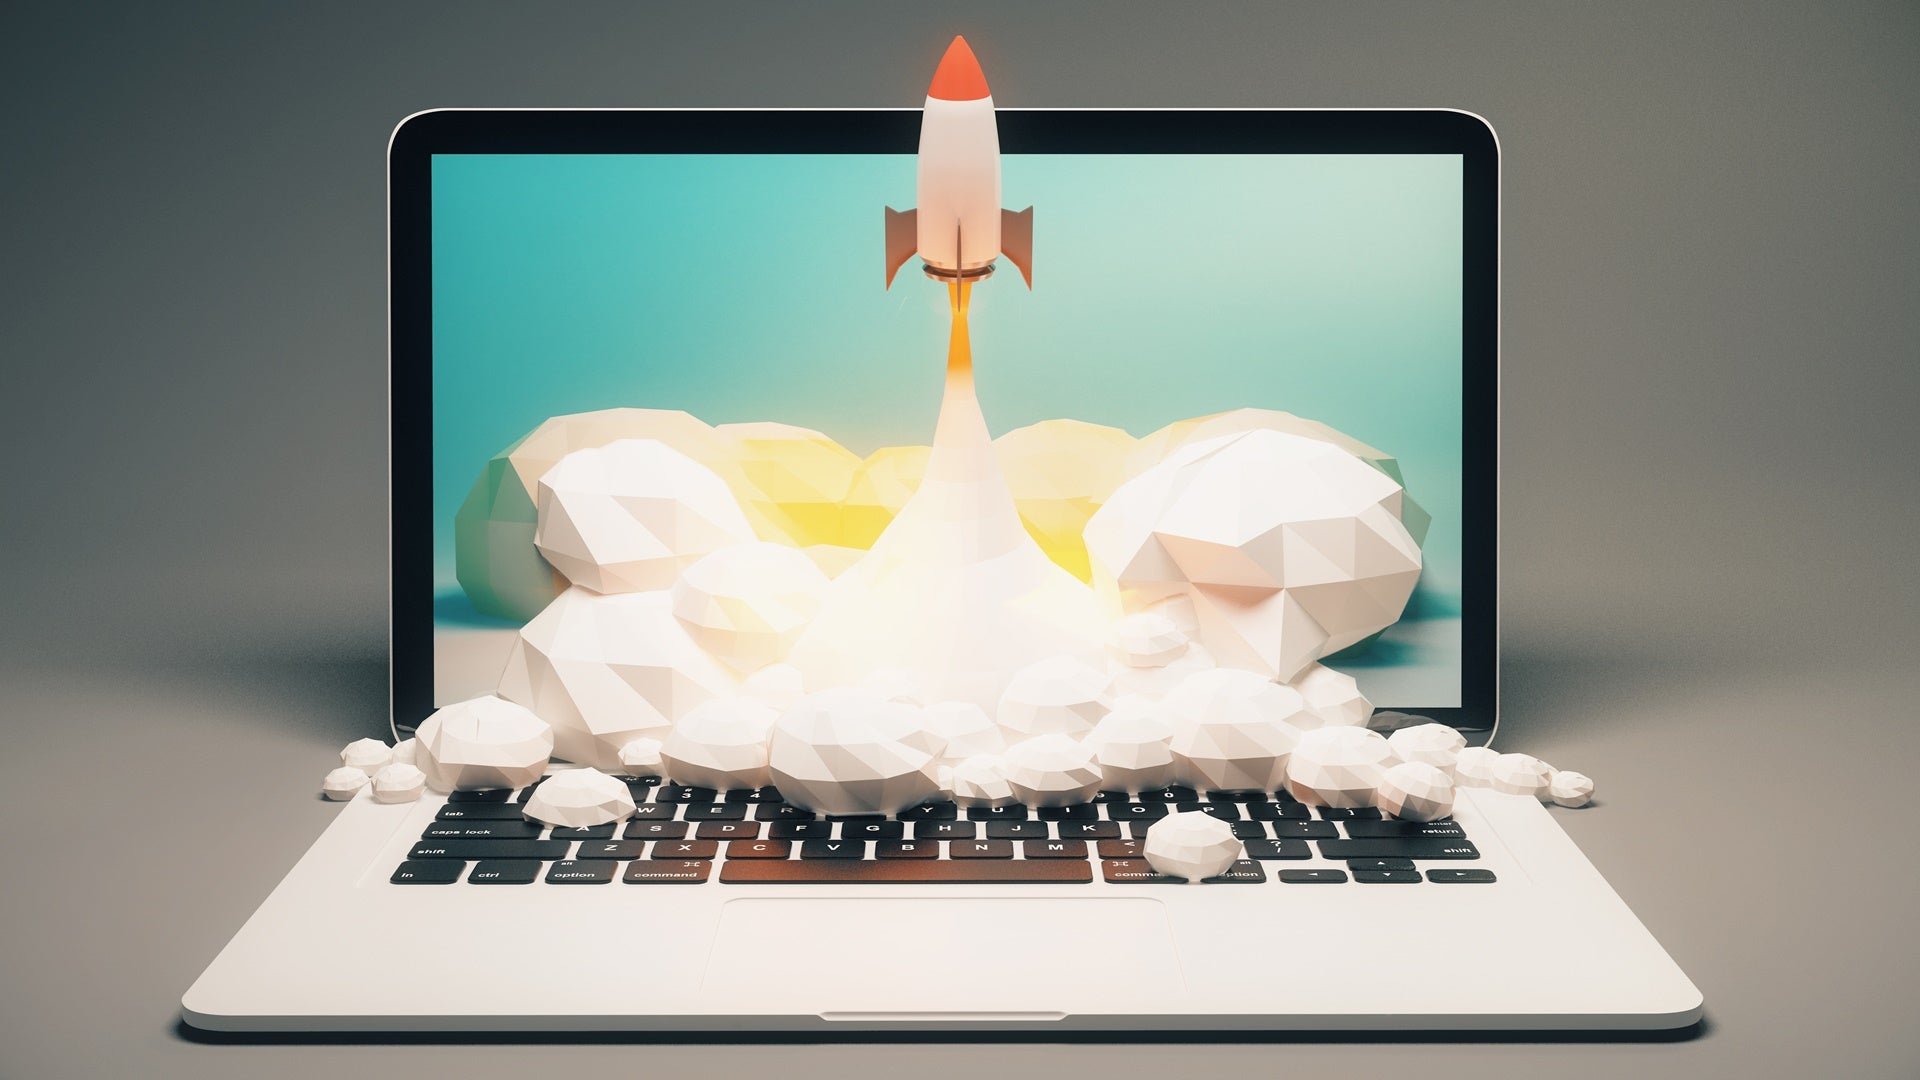 Startup concept with rocket flying out of laptop screen on grey background. 3D Rendering